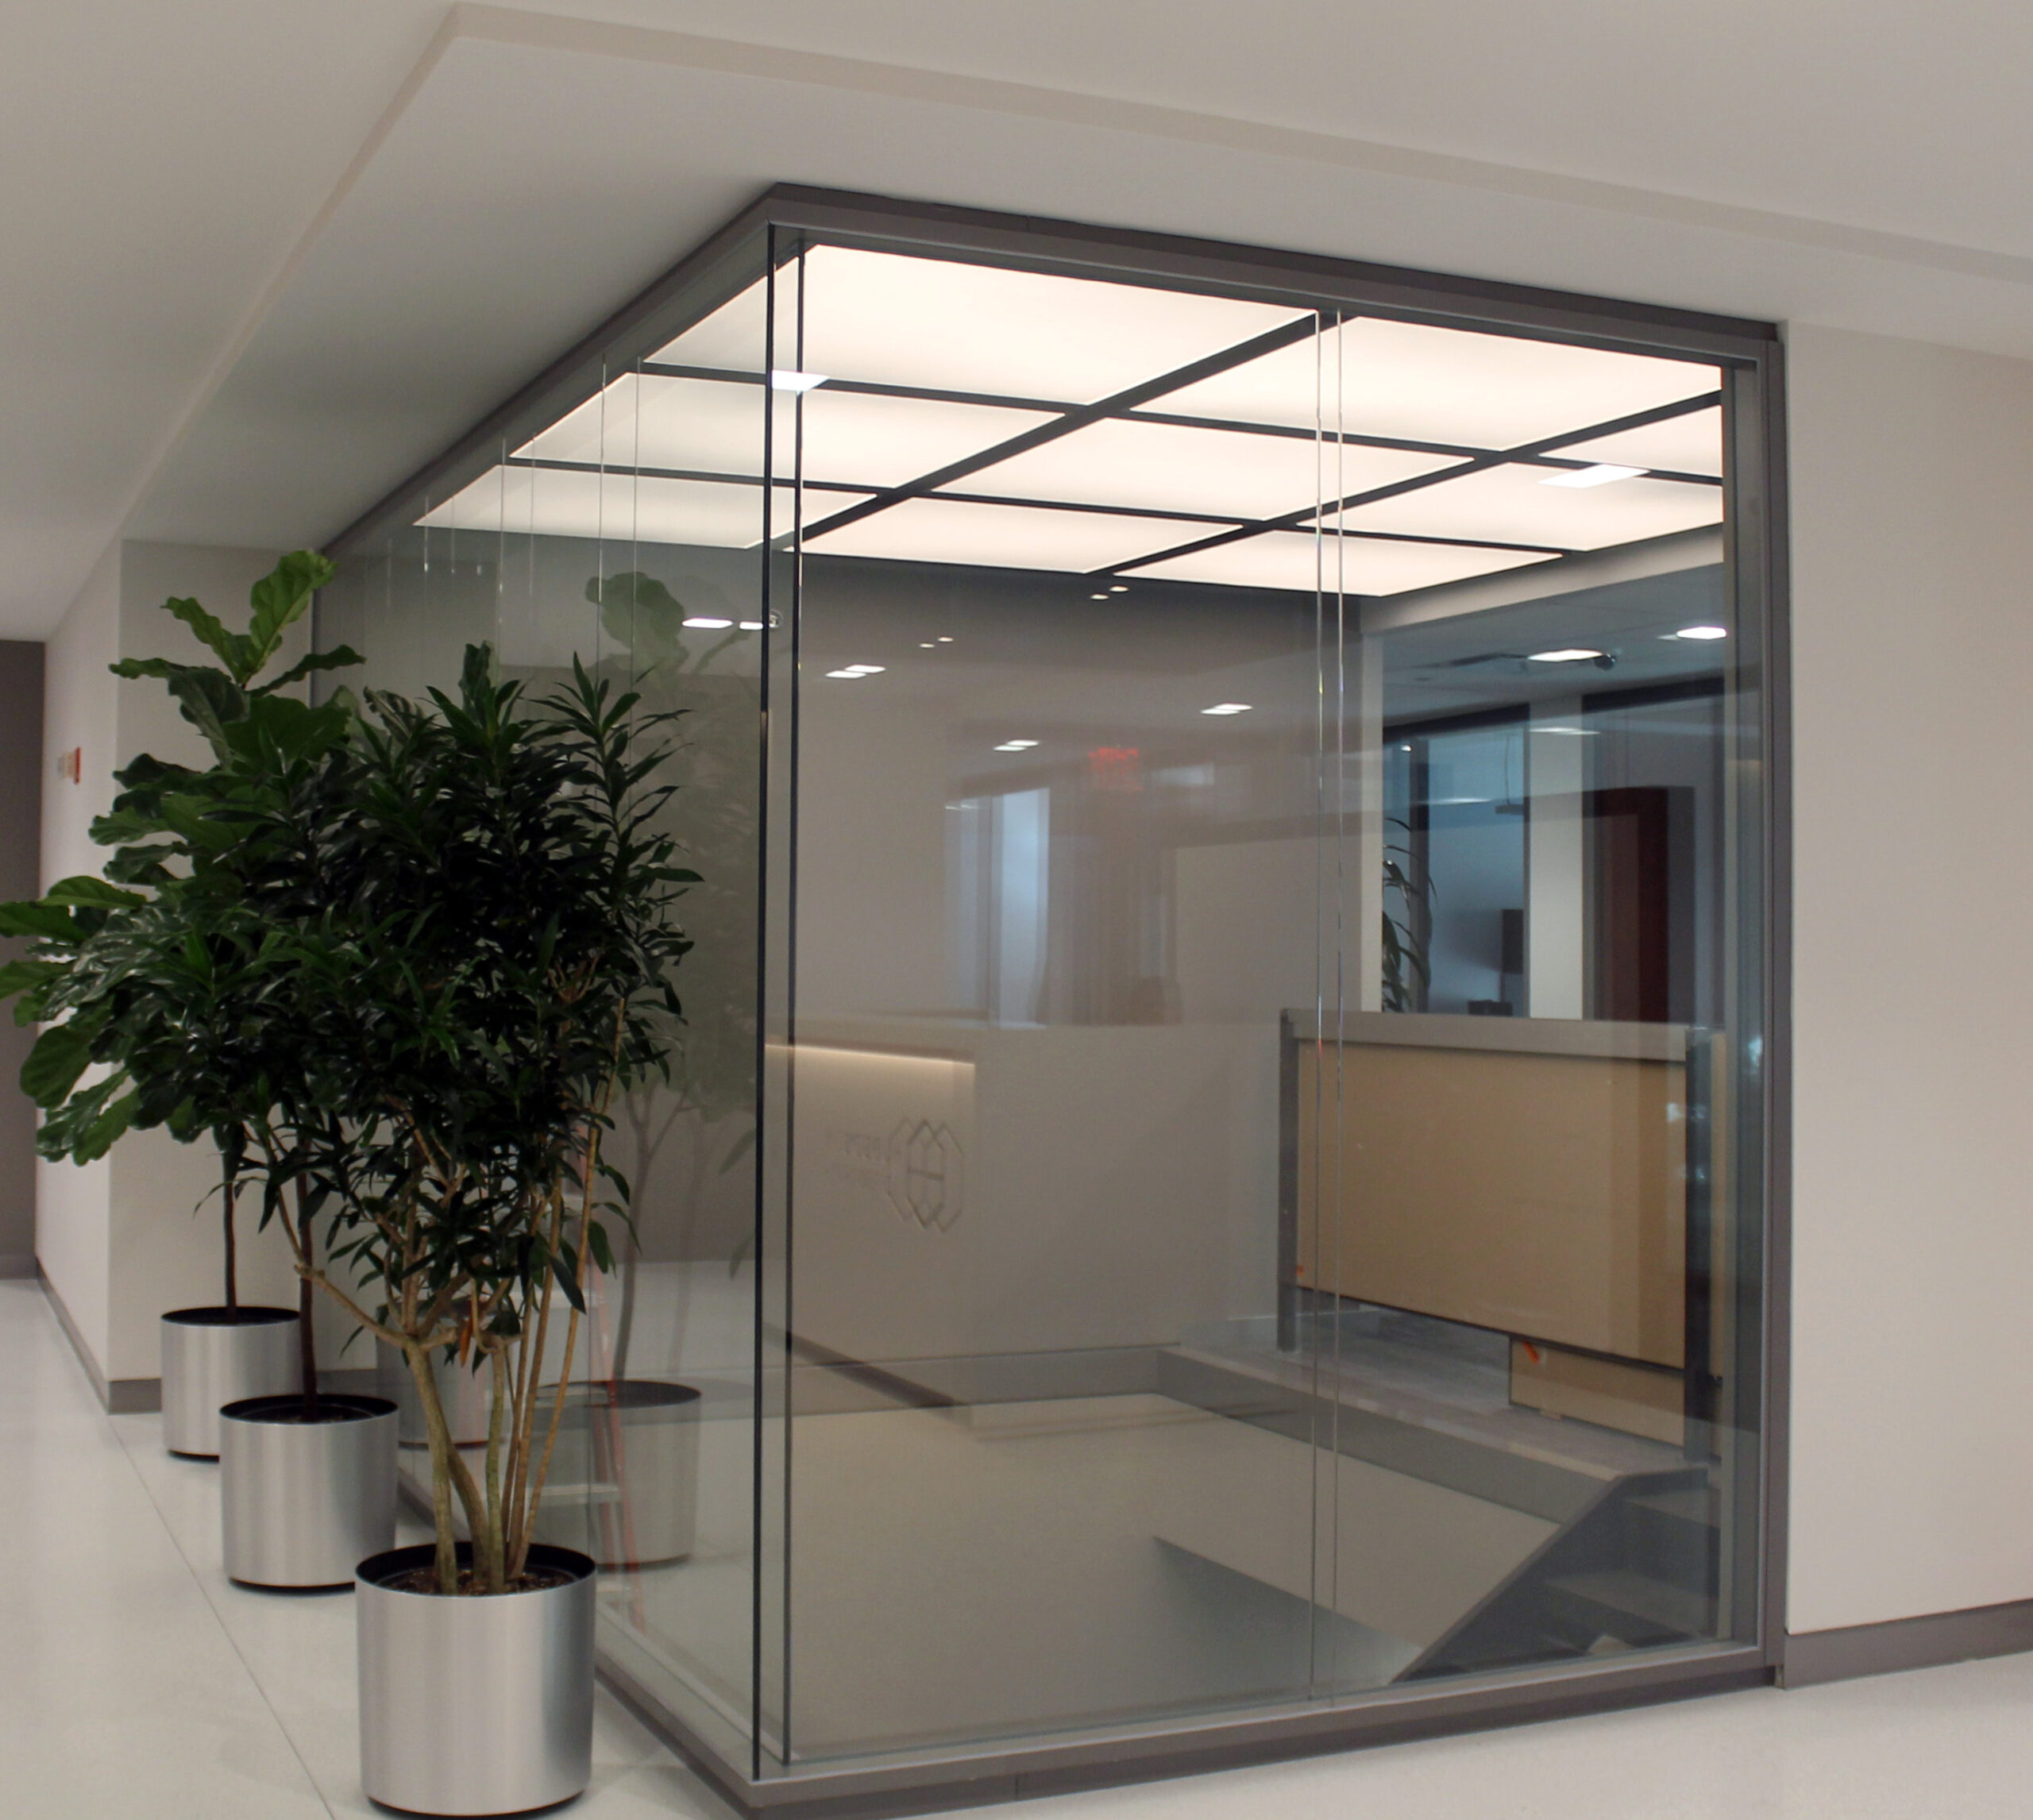 TechoLED Panels installation in office